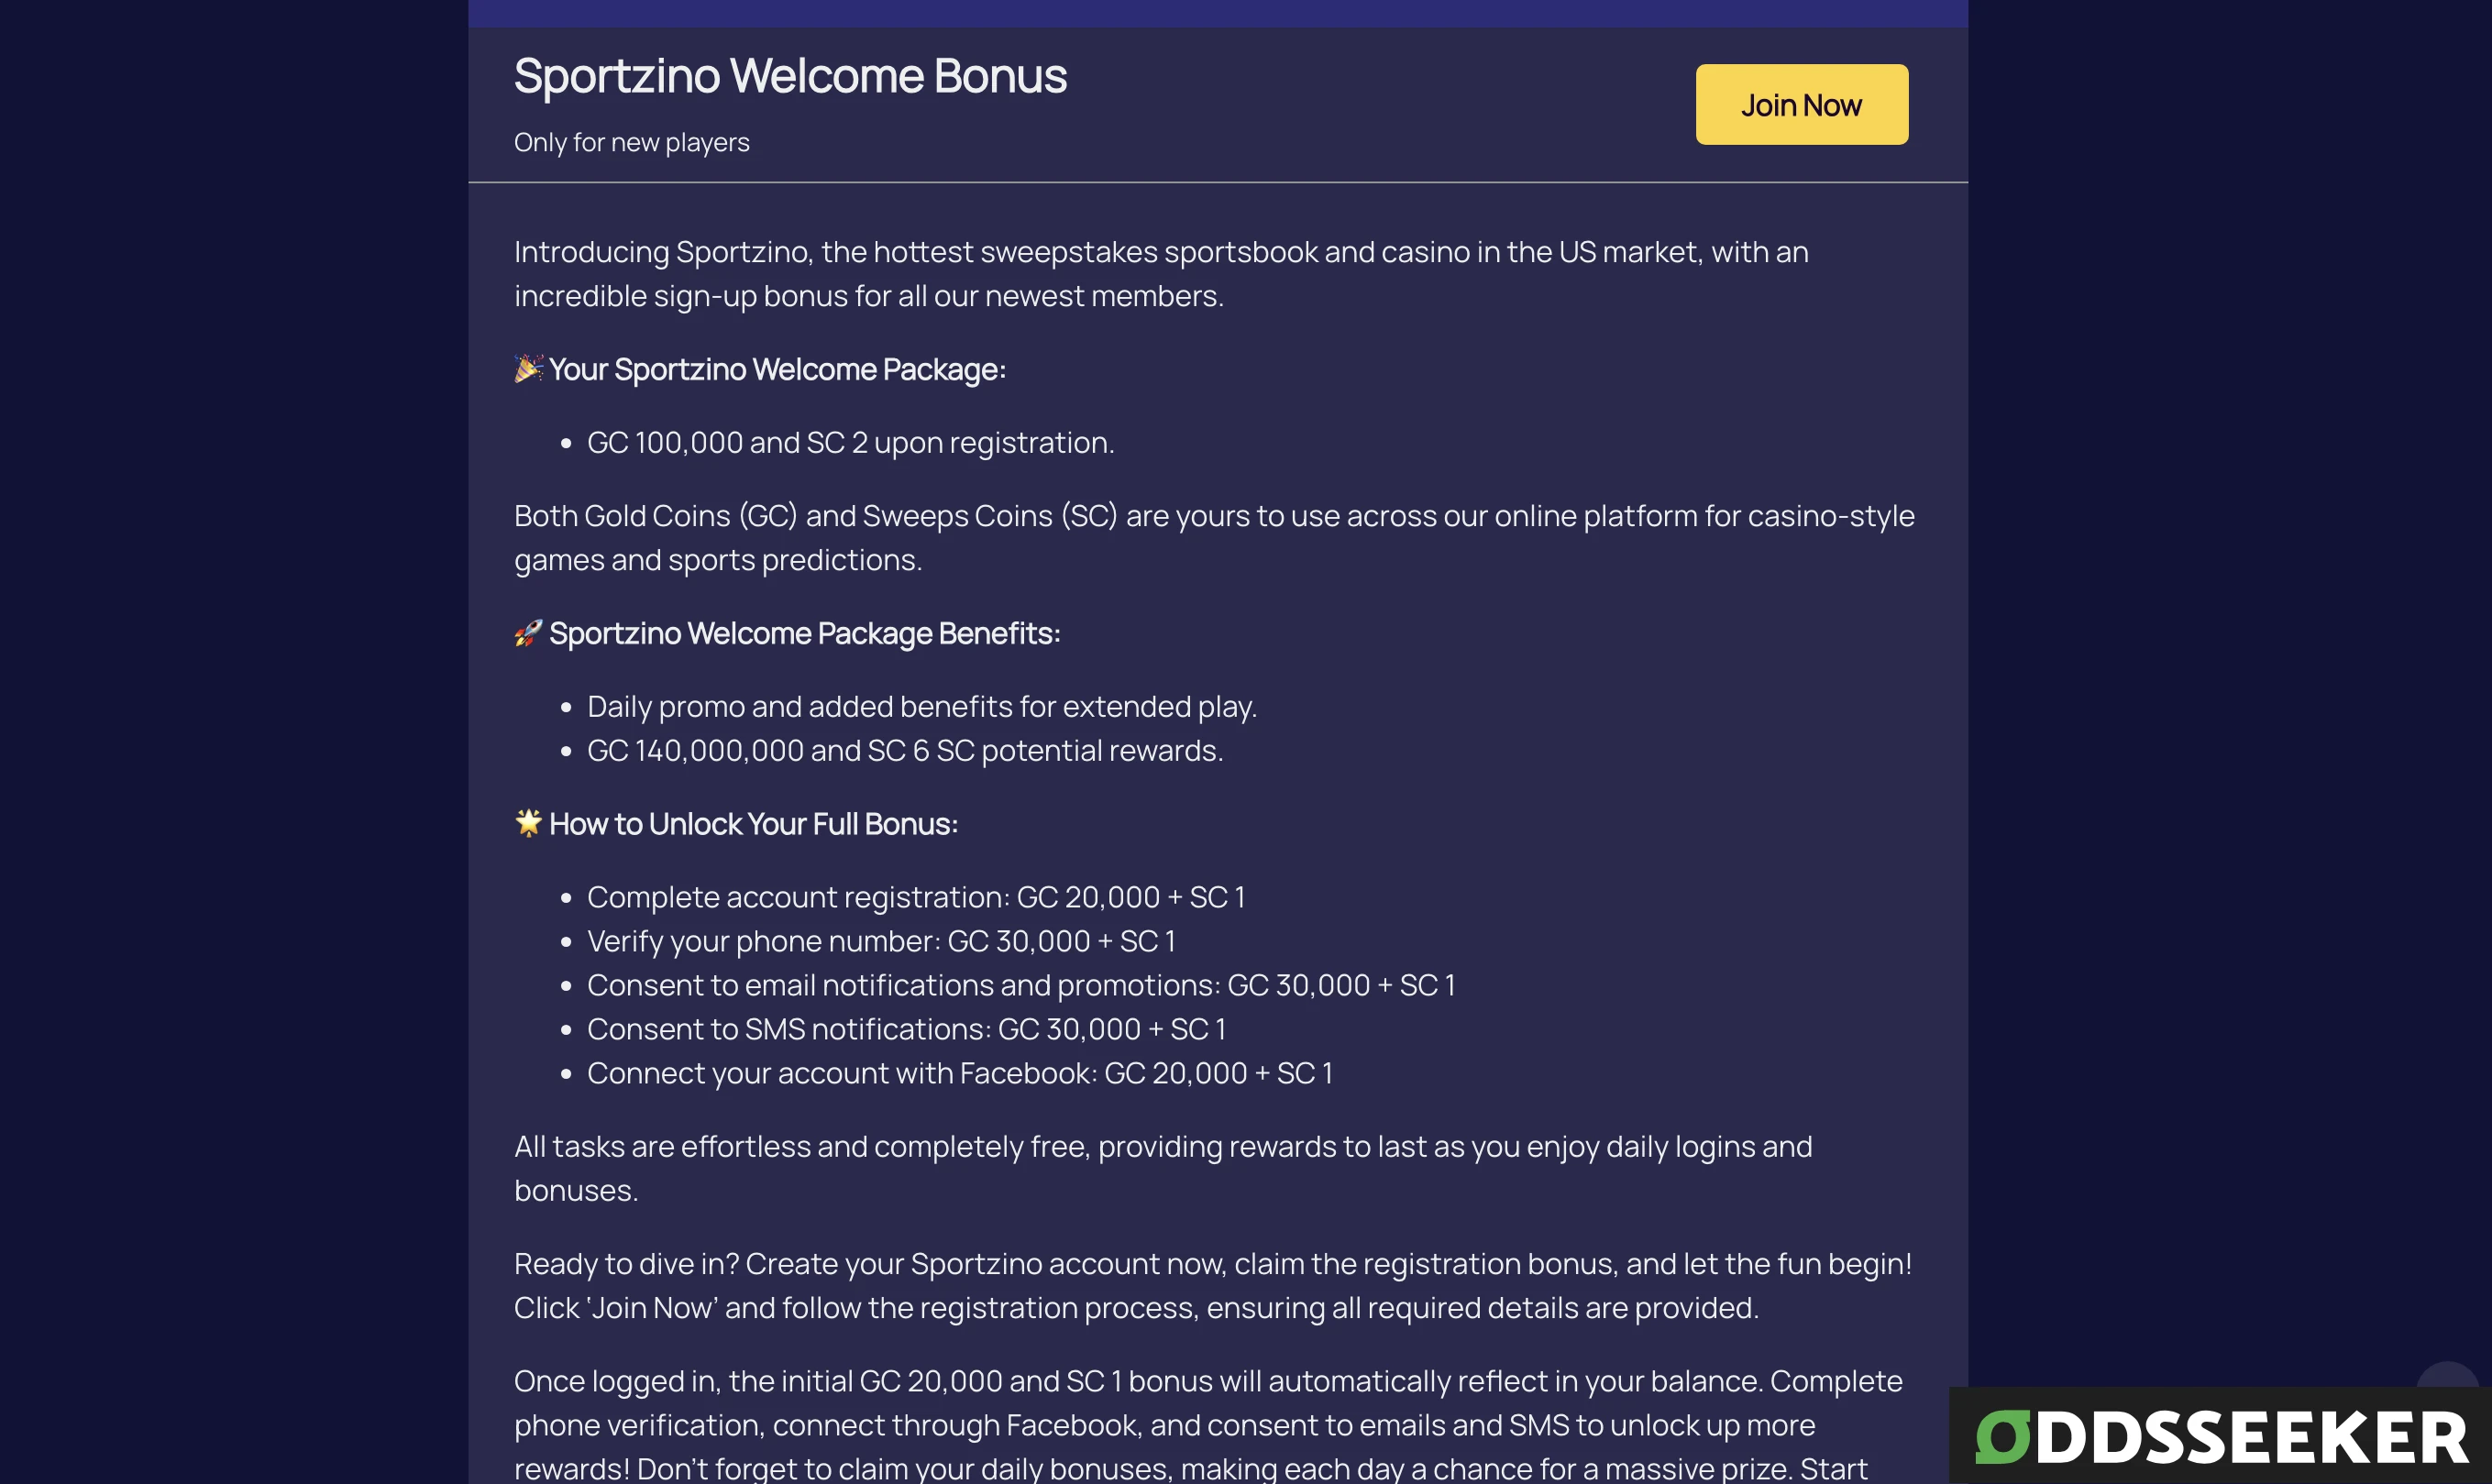 Full details and terms of the Sportzino Casino Welcome Promo